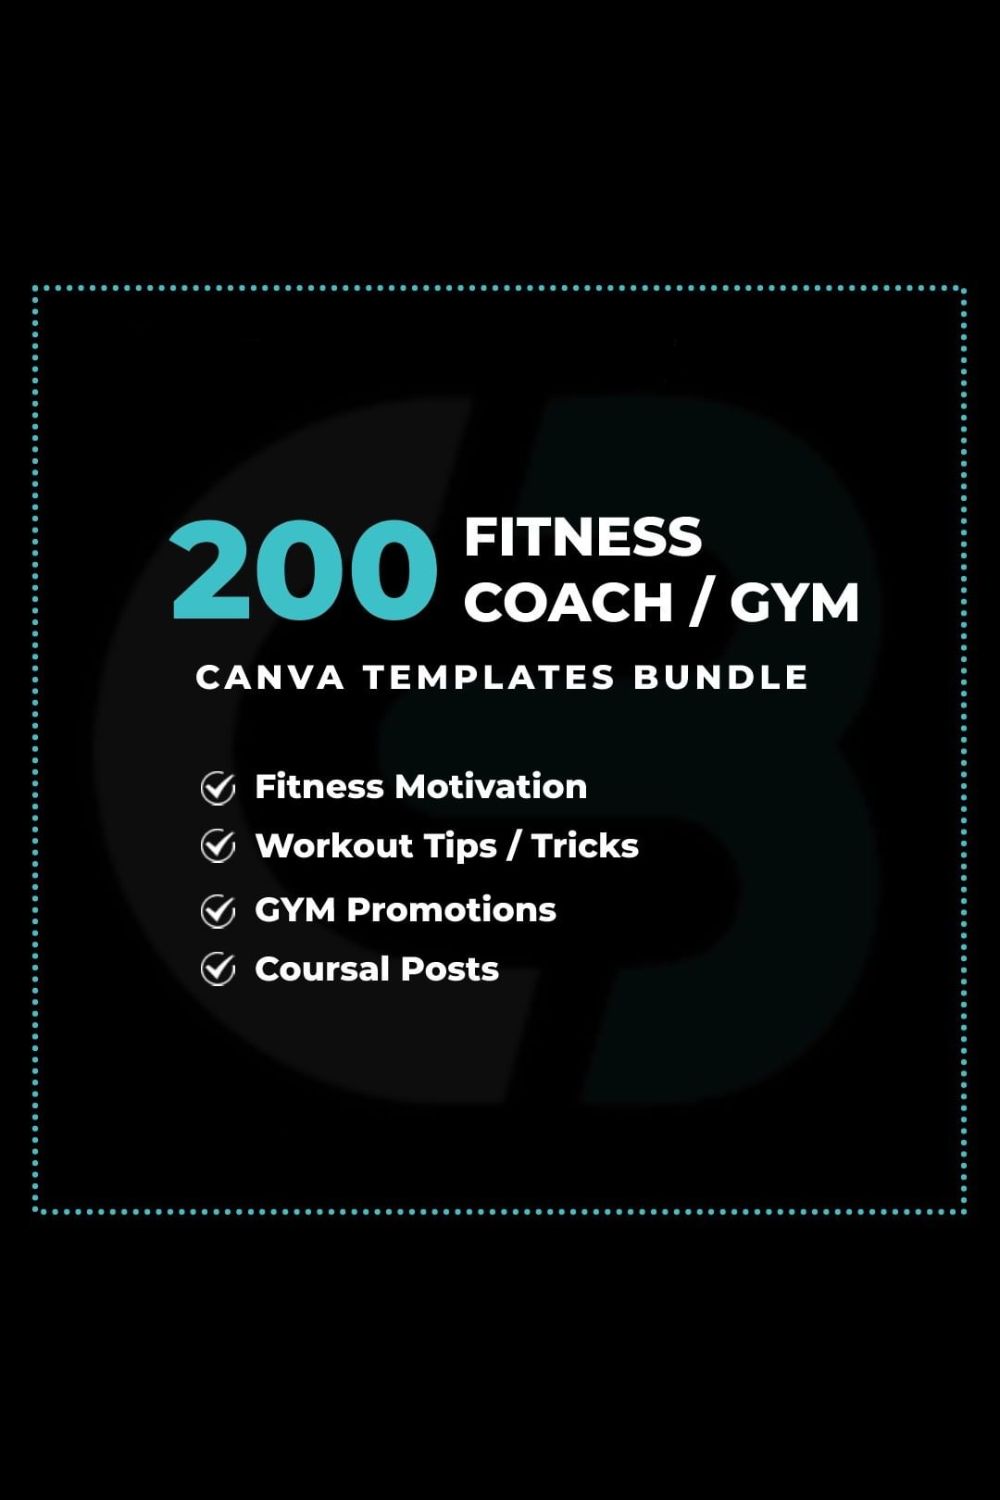 Fitness Coach and GYM Owners Canva Templates Bundle Pinterest image.